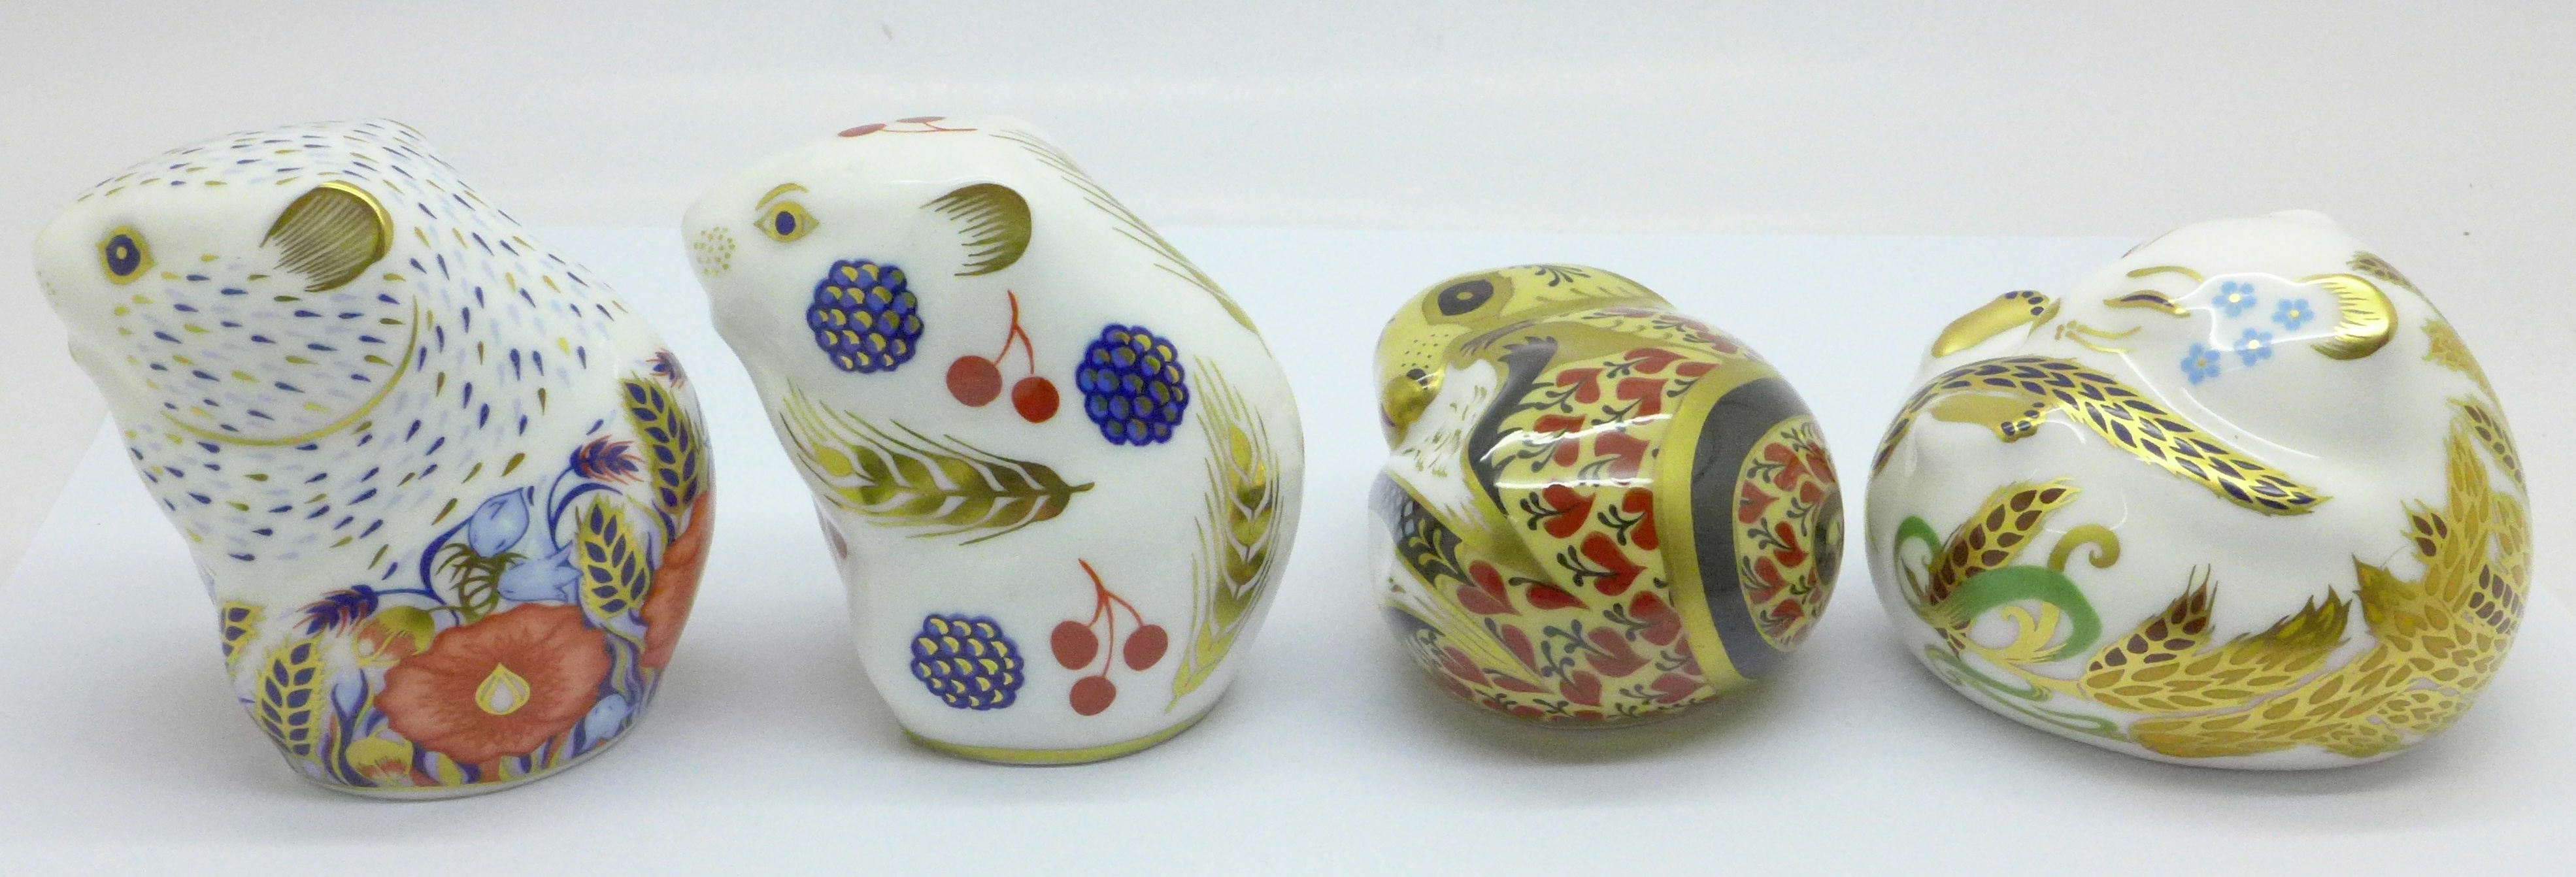 Four Royal Crown Derby paperweights, Poppy Mouse, Country Mouse, Sleeping Dormouse and Harvest - Image 4 of 6